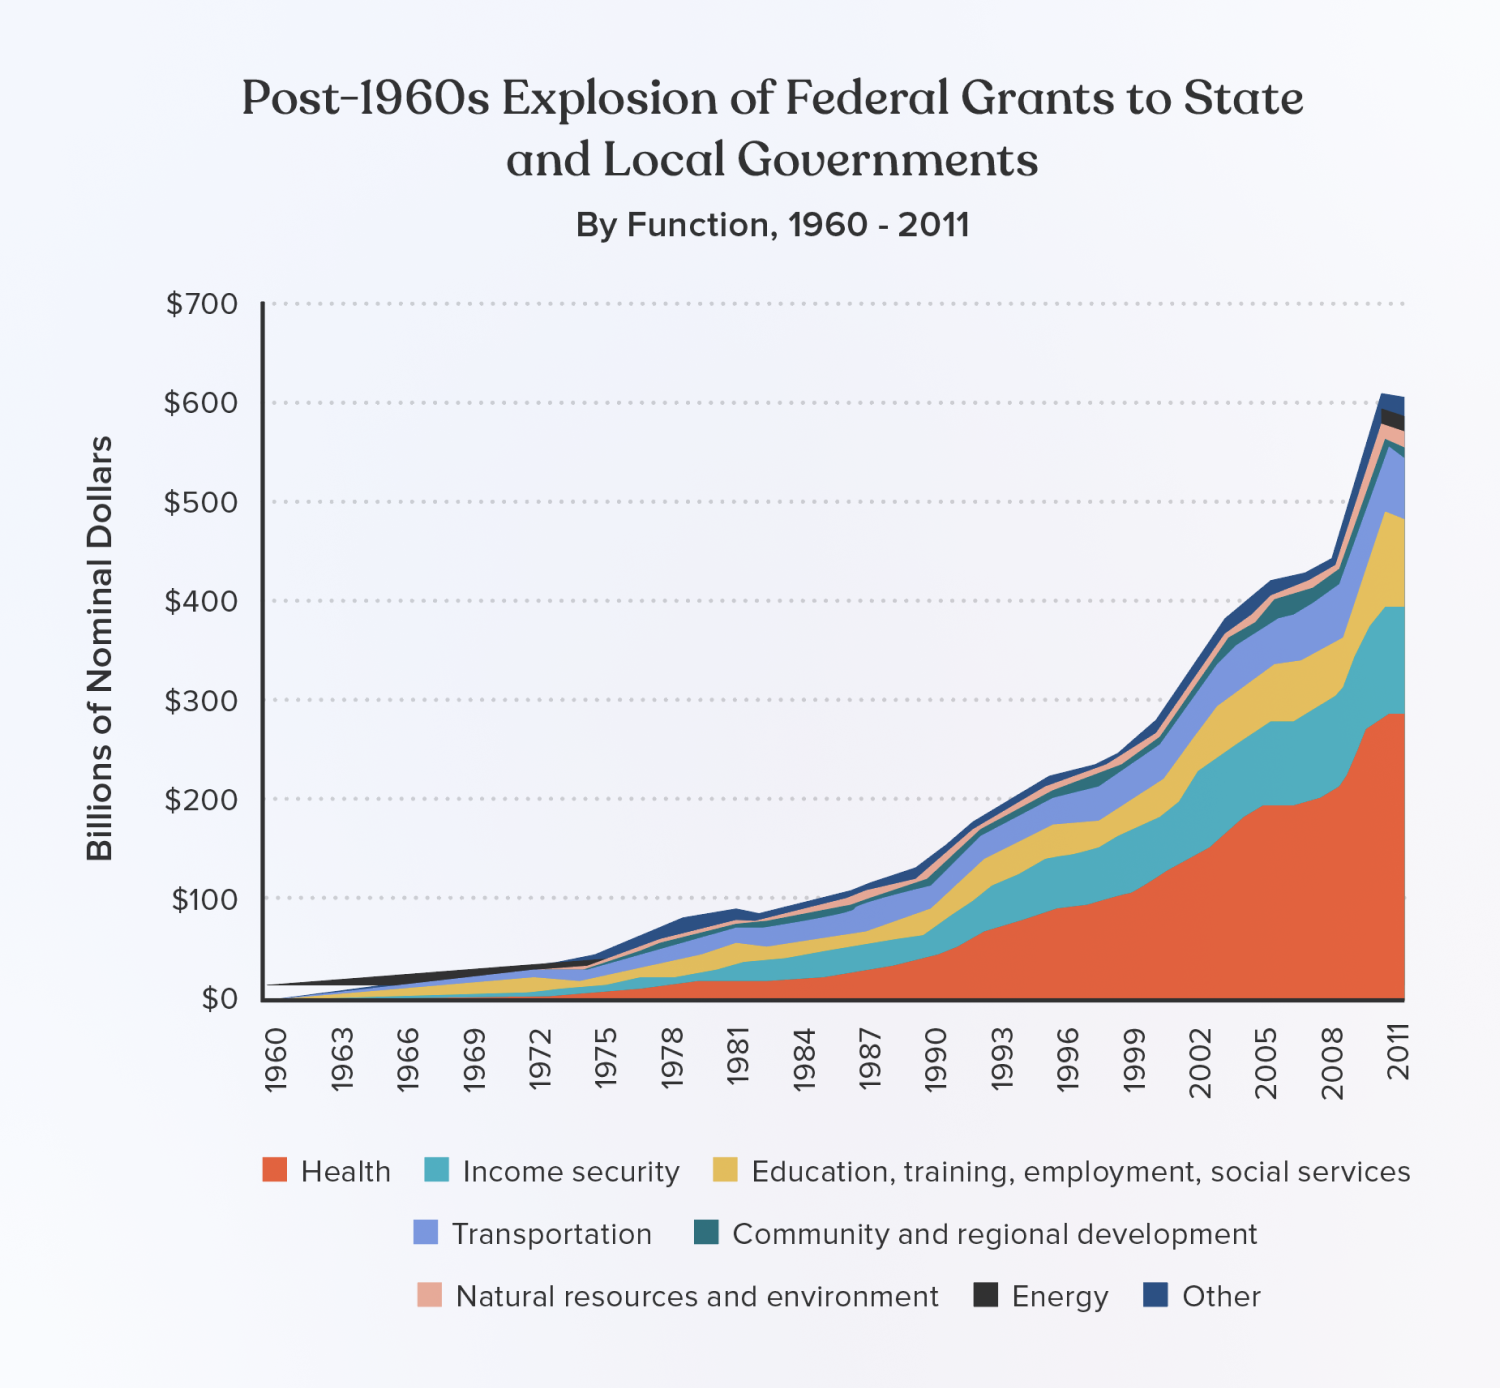 Federal grant aid data from Mercatus Center